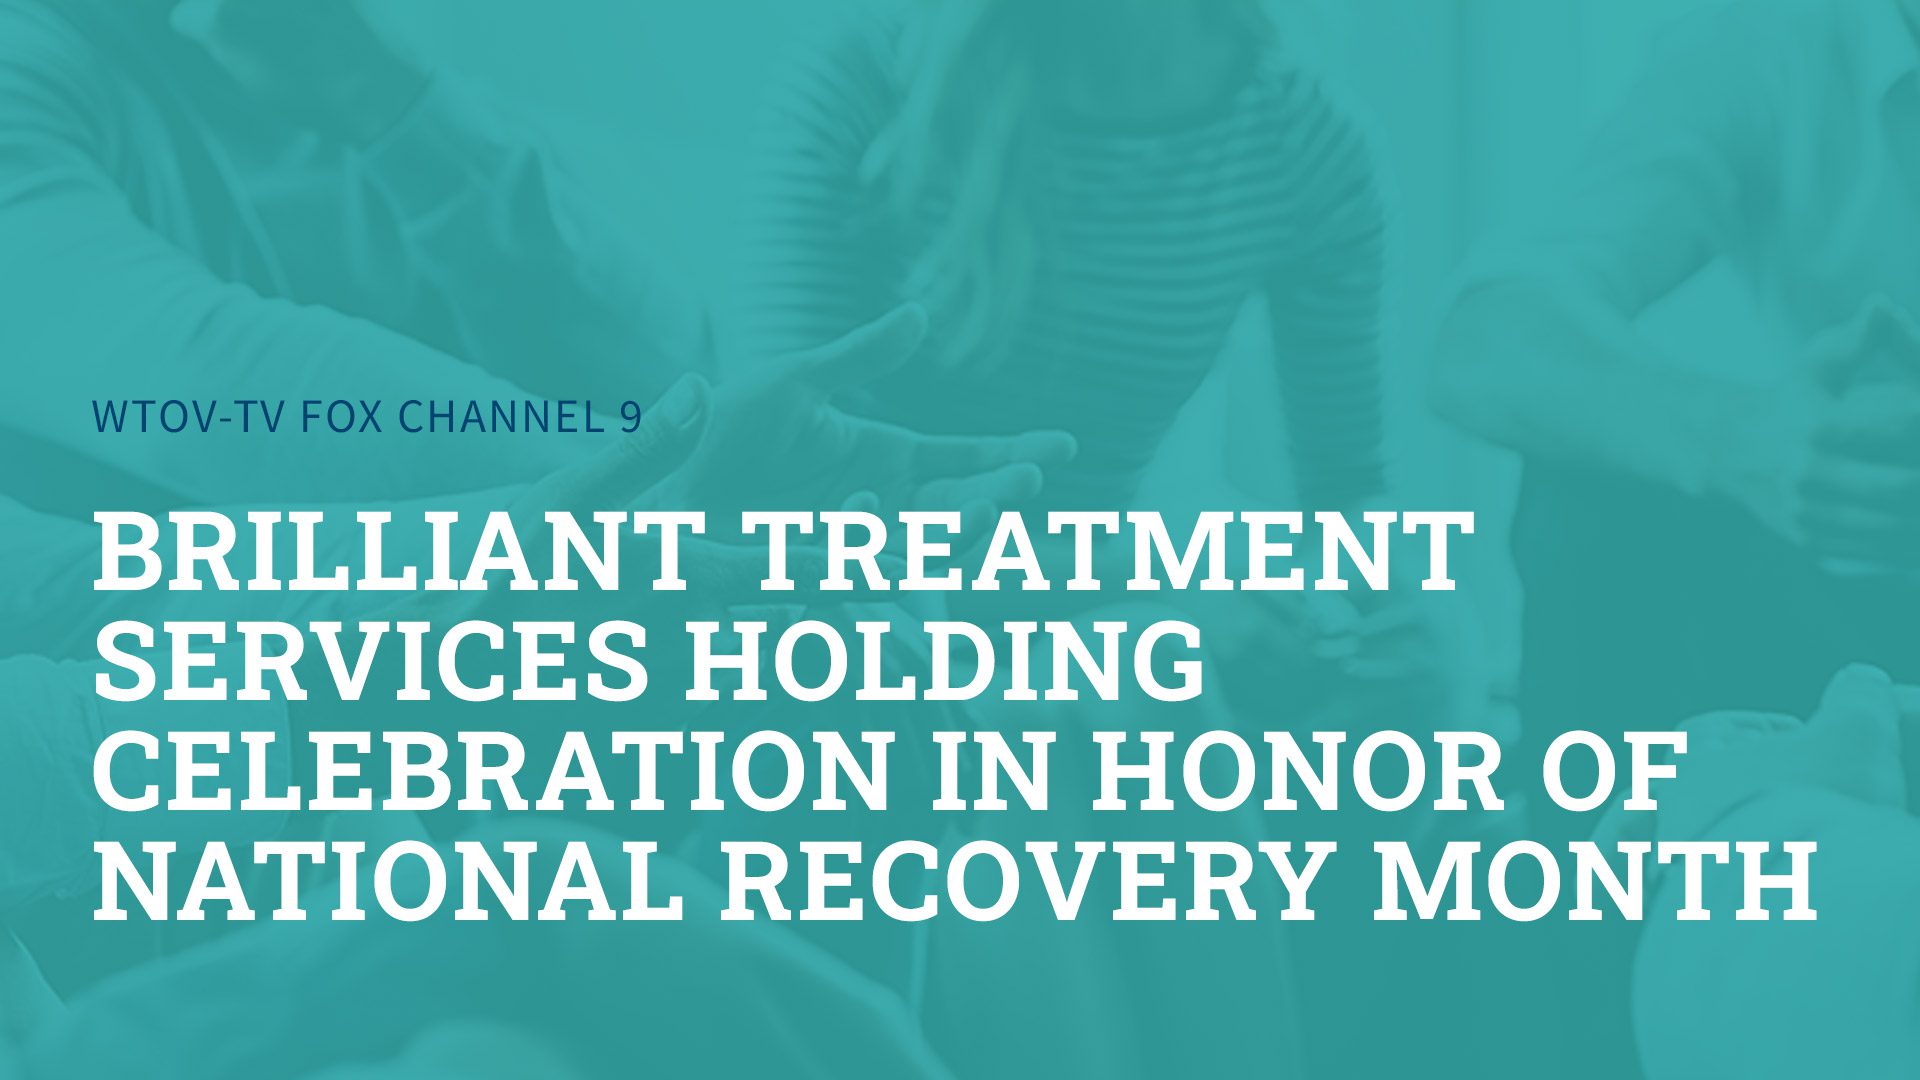 Brilliant Treatment Services holding celebration in honor of National Recovery Month